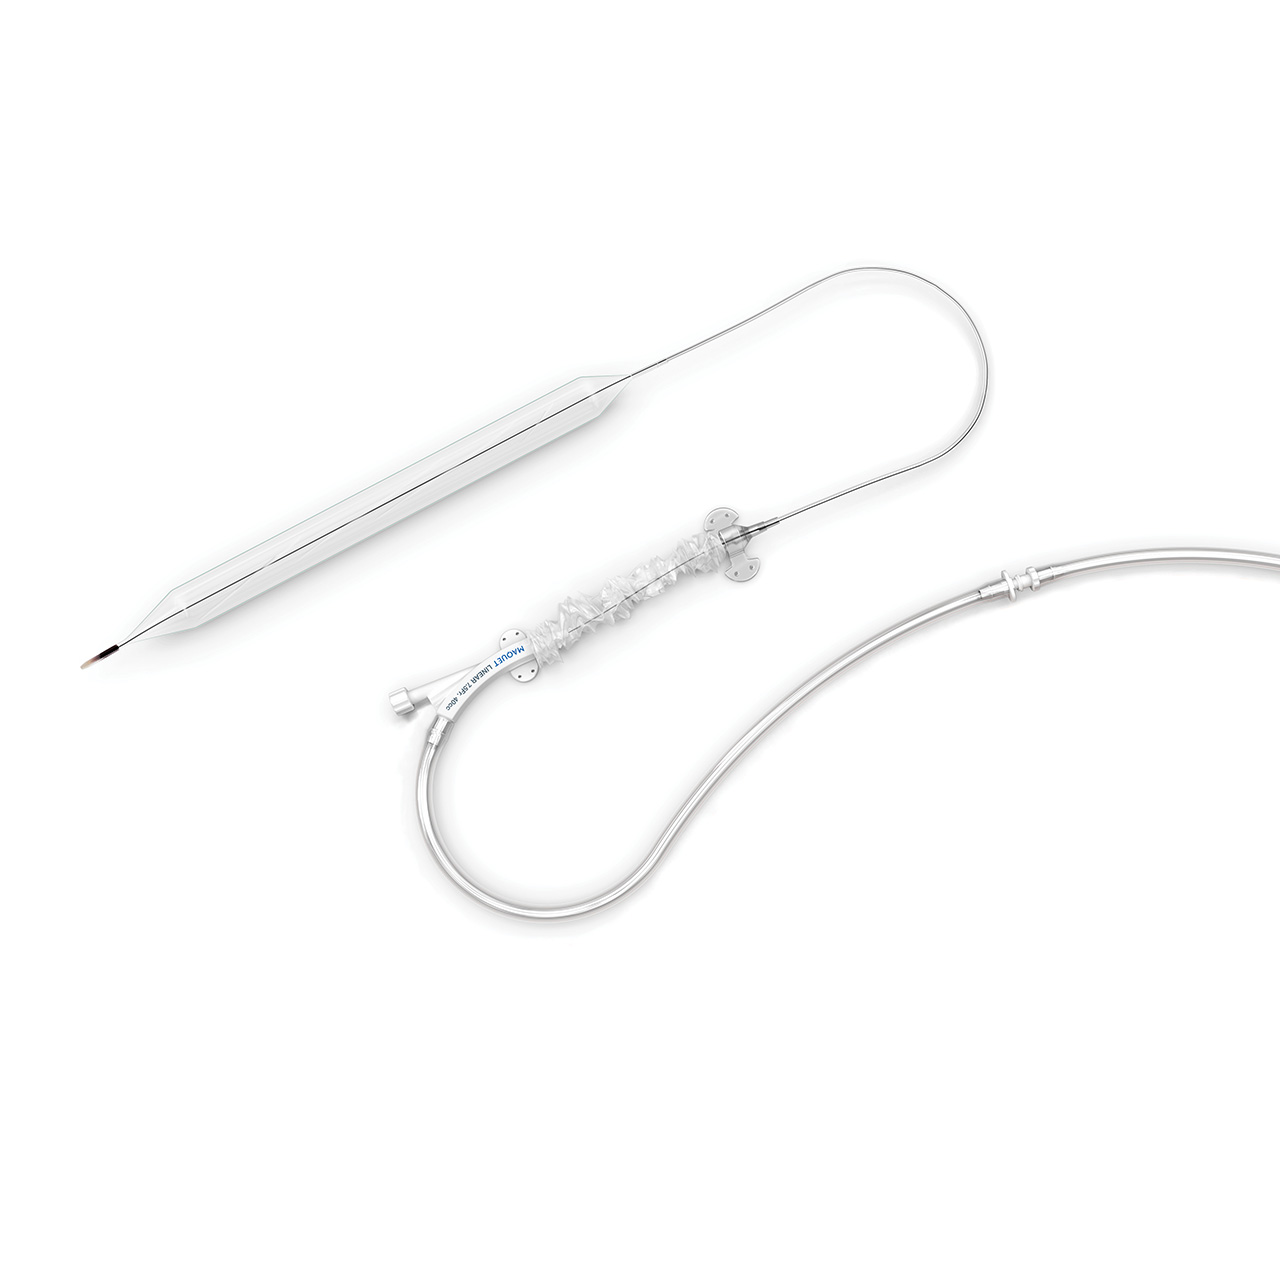 Linear Intra-aortic balloon catheter designed for hemodynamic support in patients with smaller peripheral vasculature